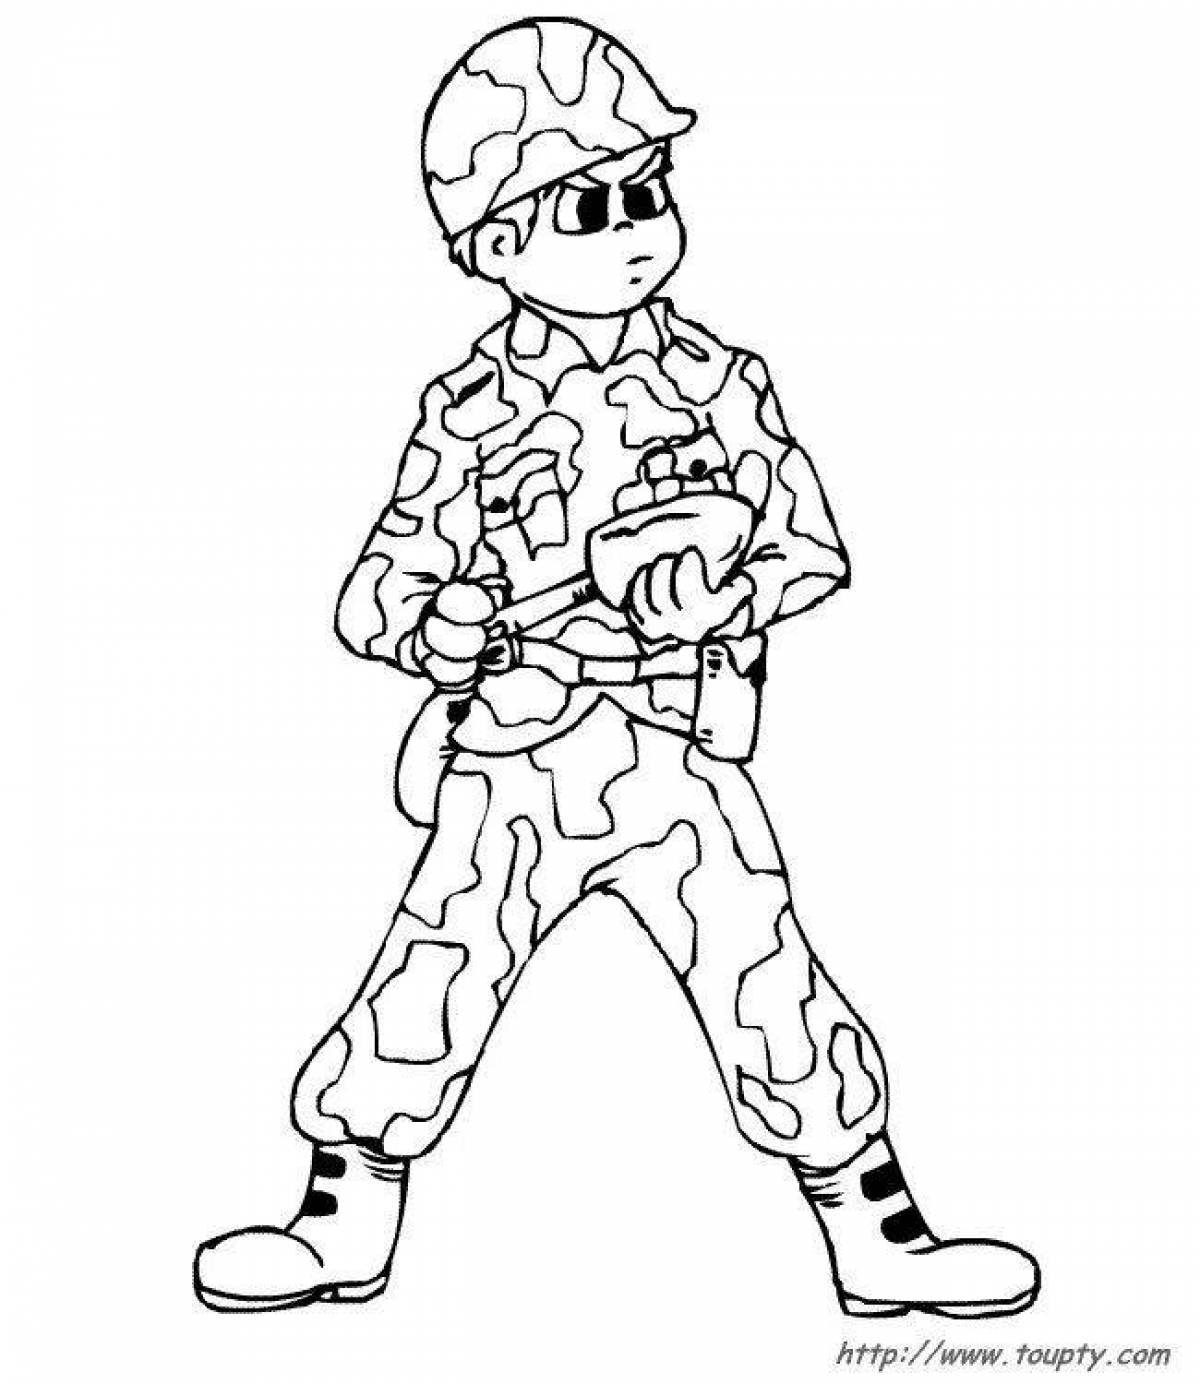 Coloring page beckoning soldier page February 23